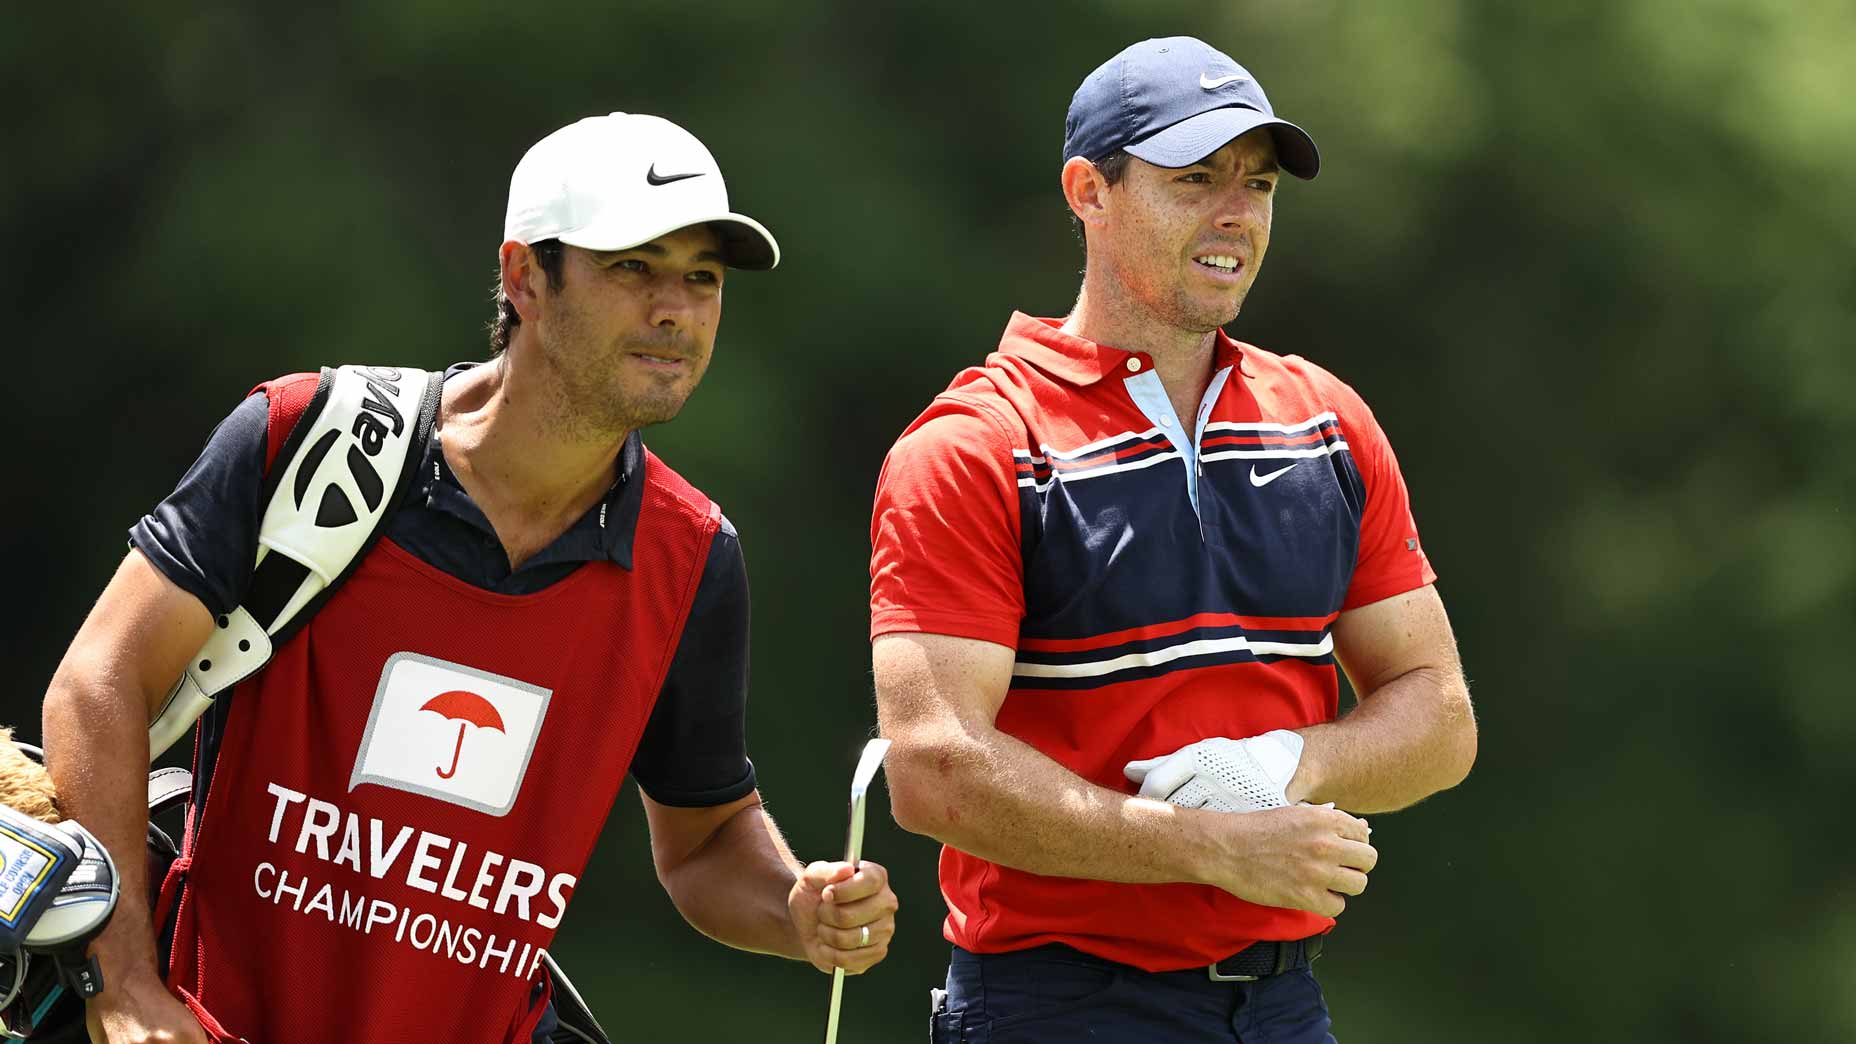 Rory McIlroy with Caddy at the 2021 Travelers Championship